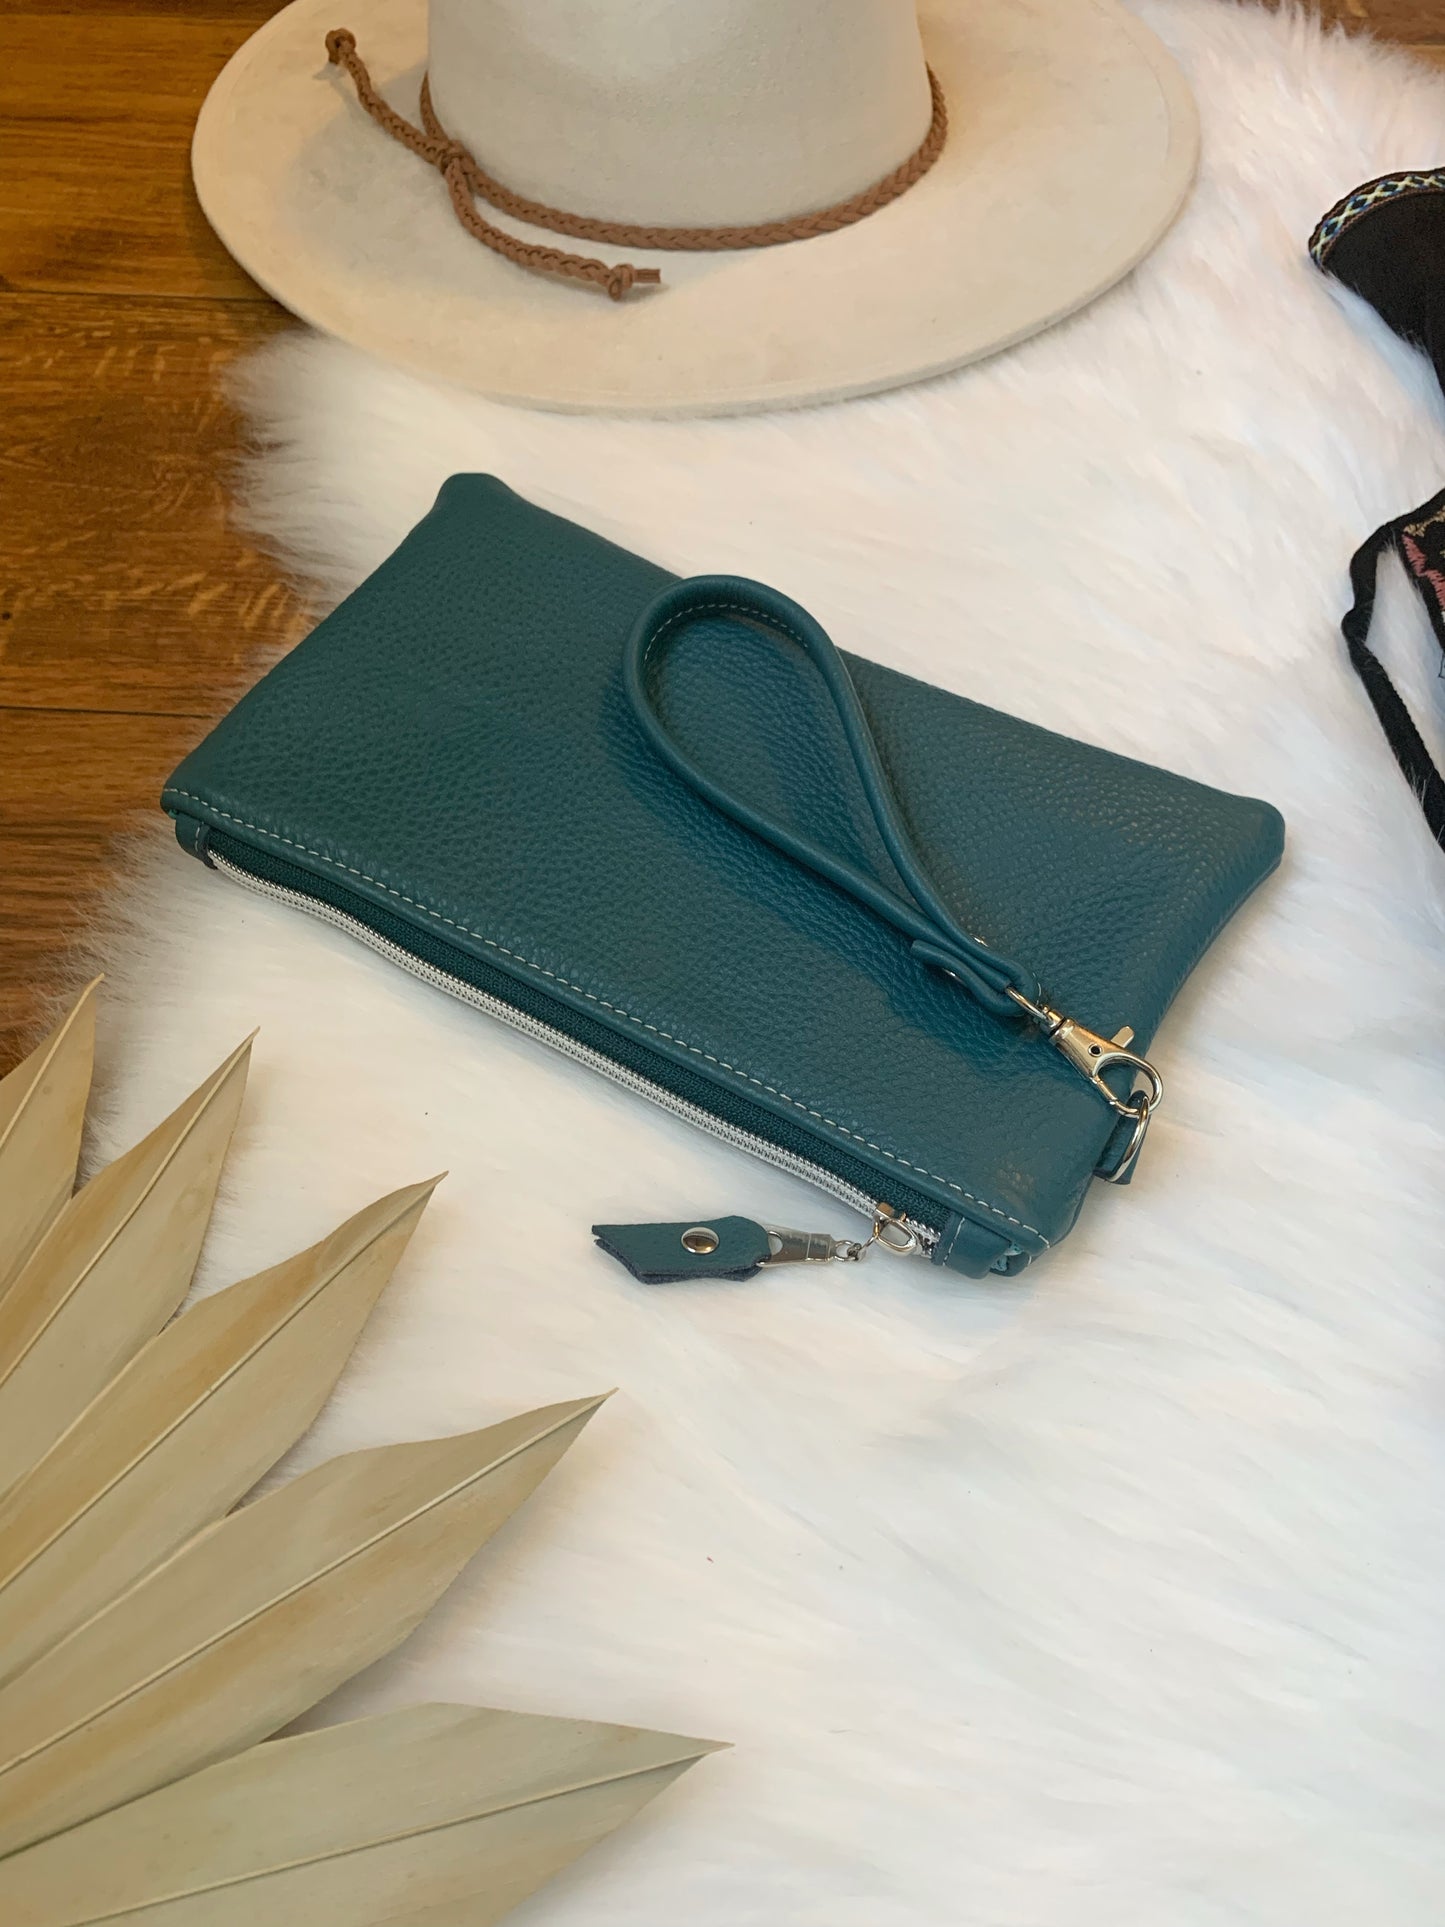 Teal leather clutch wallet, genuine leather clutch, leather wristlet